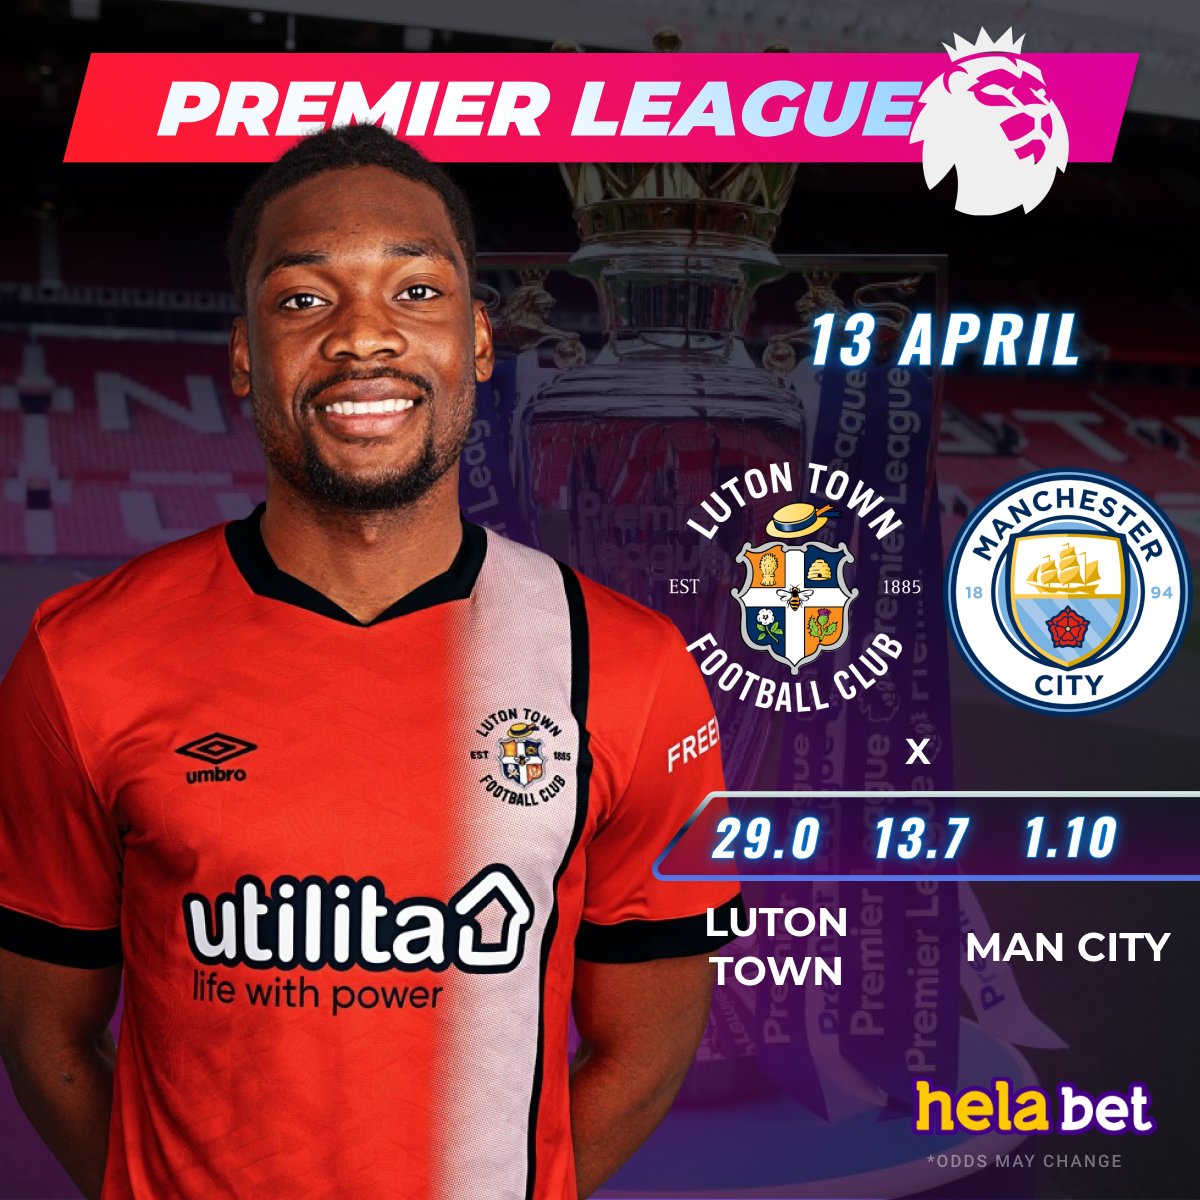 🇬🇧 Premier League 🇬🇧 ⚽ #Luton town VS #Machester City ❓ What will be the scoer of the match? 👉 Place your bet in #helabet 👉 cutt.ly/UwY8h1uG #premierleague #epl #football #betting